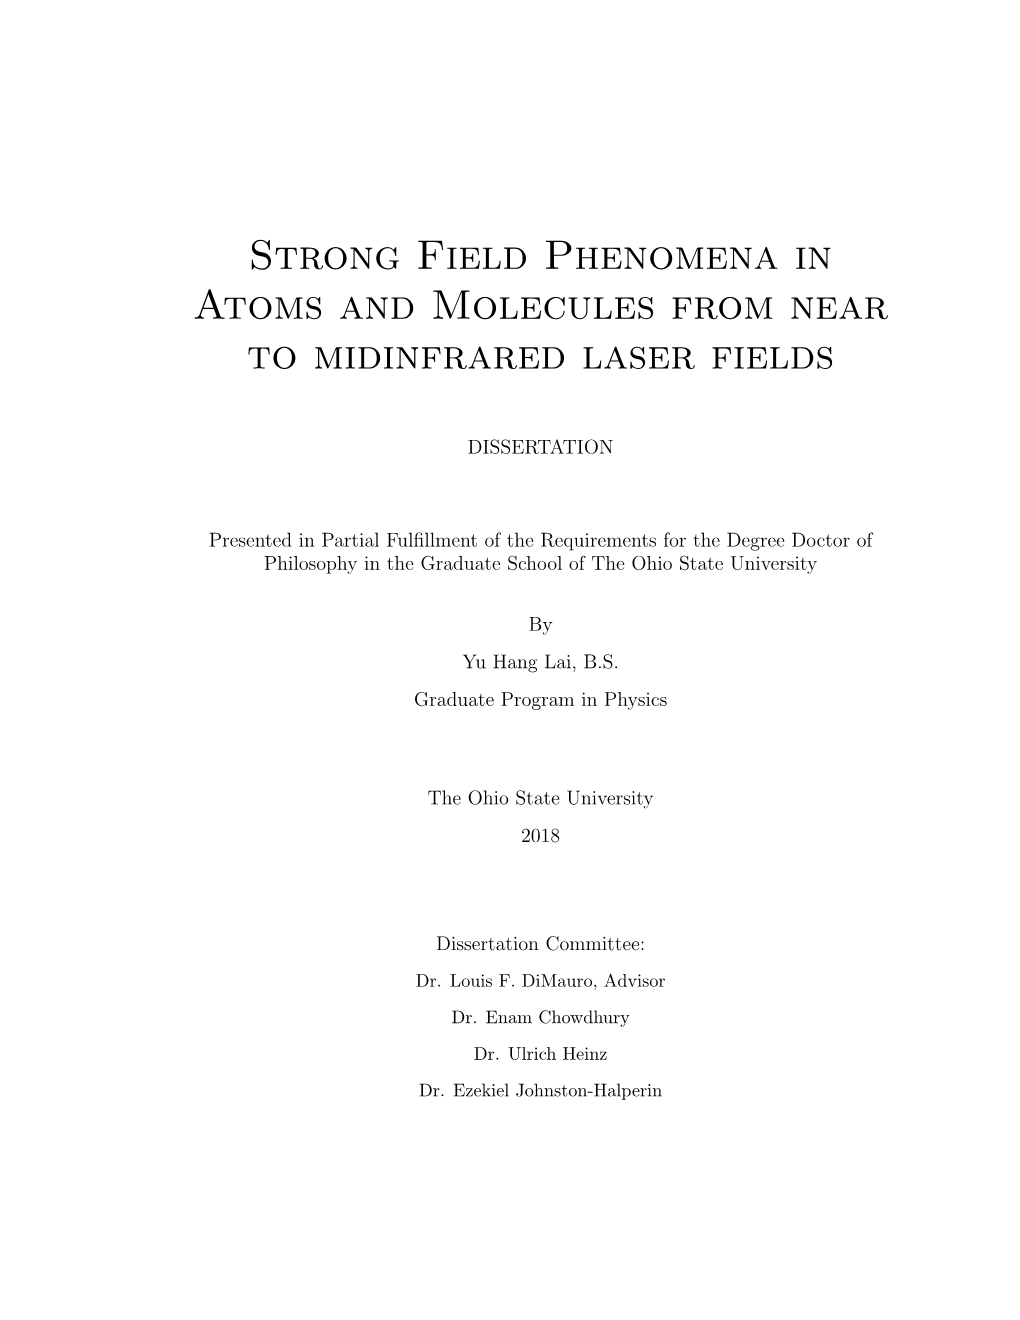 Strong Field Phenomena in Atoms and Molecules from Near to Midinfrared Laser Fields